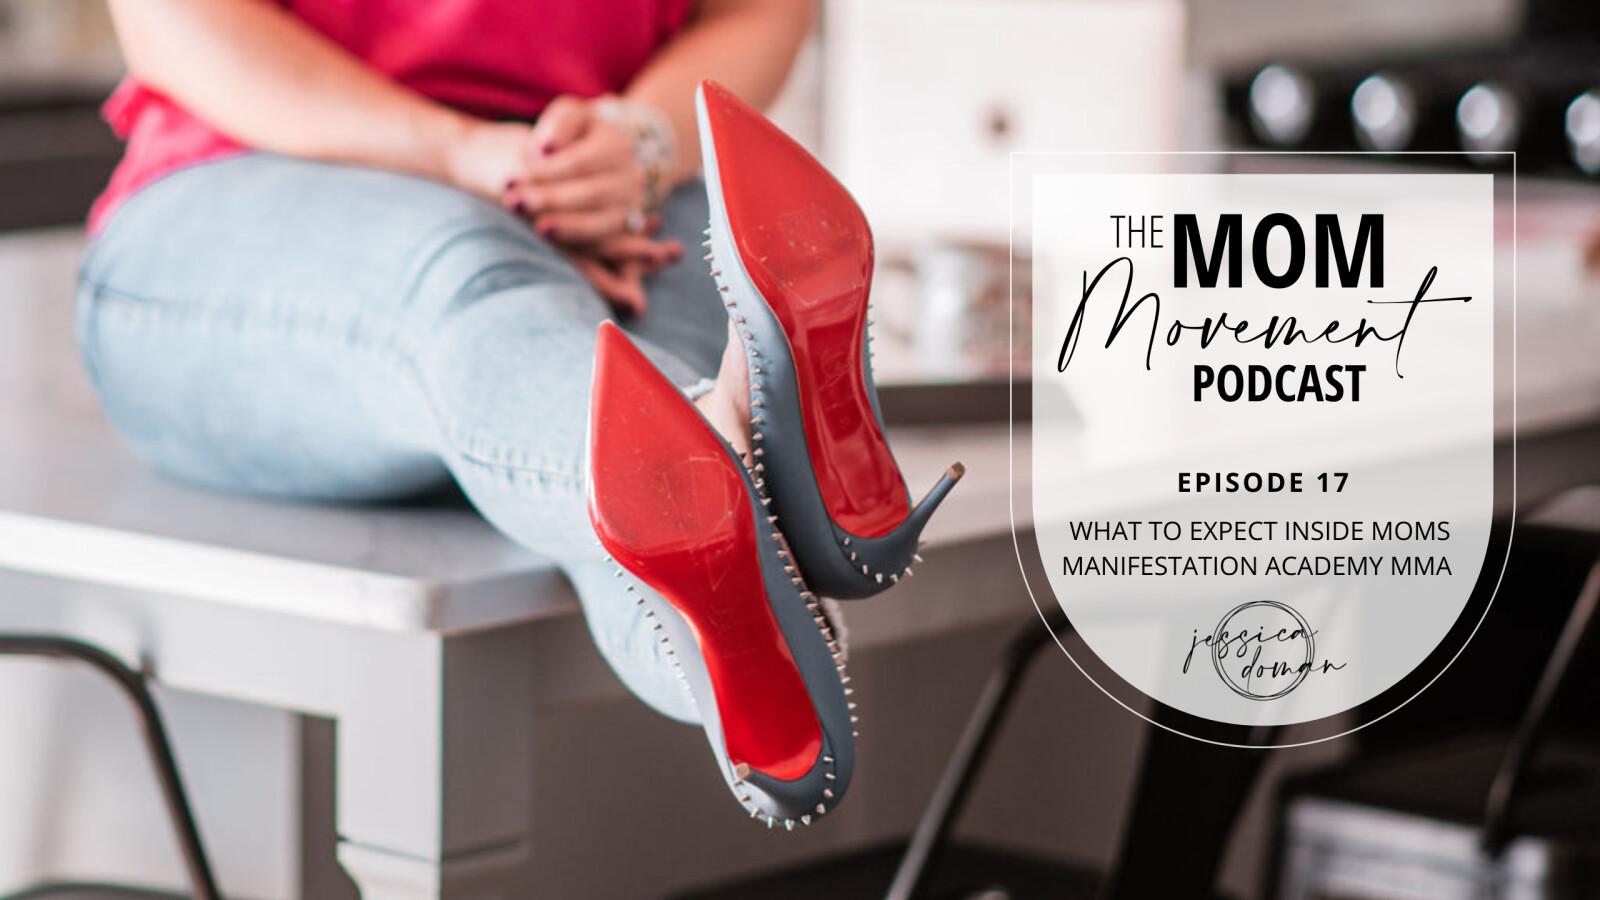 Podcast Episode #17: What To Expect Inside Mom's Manifestation Academy